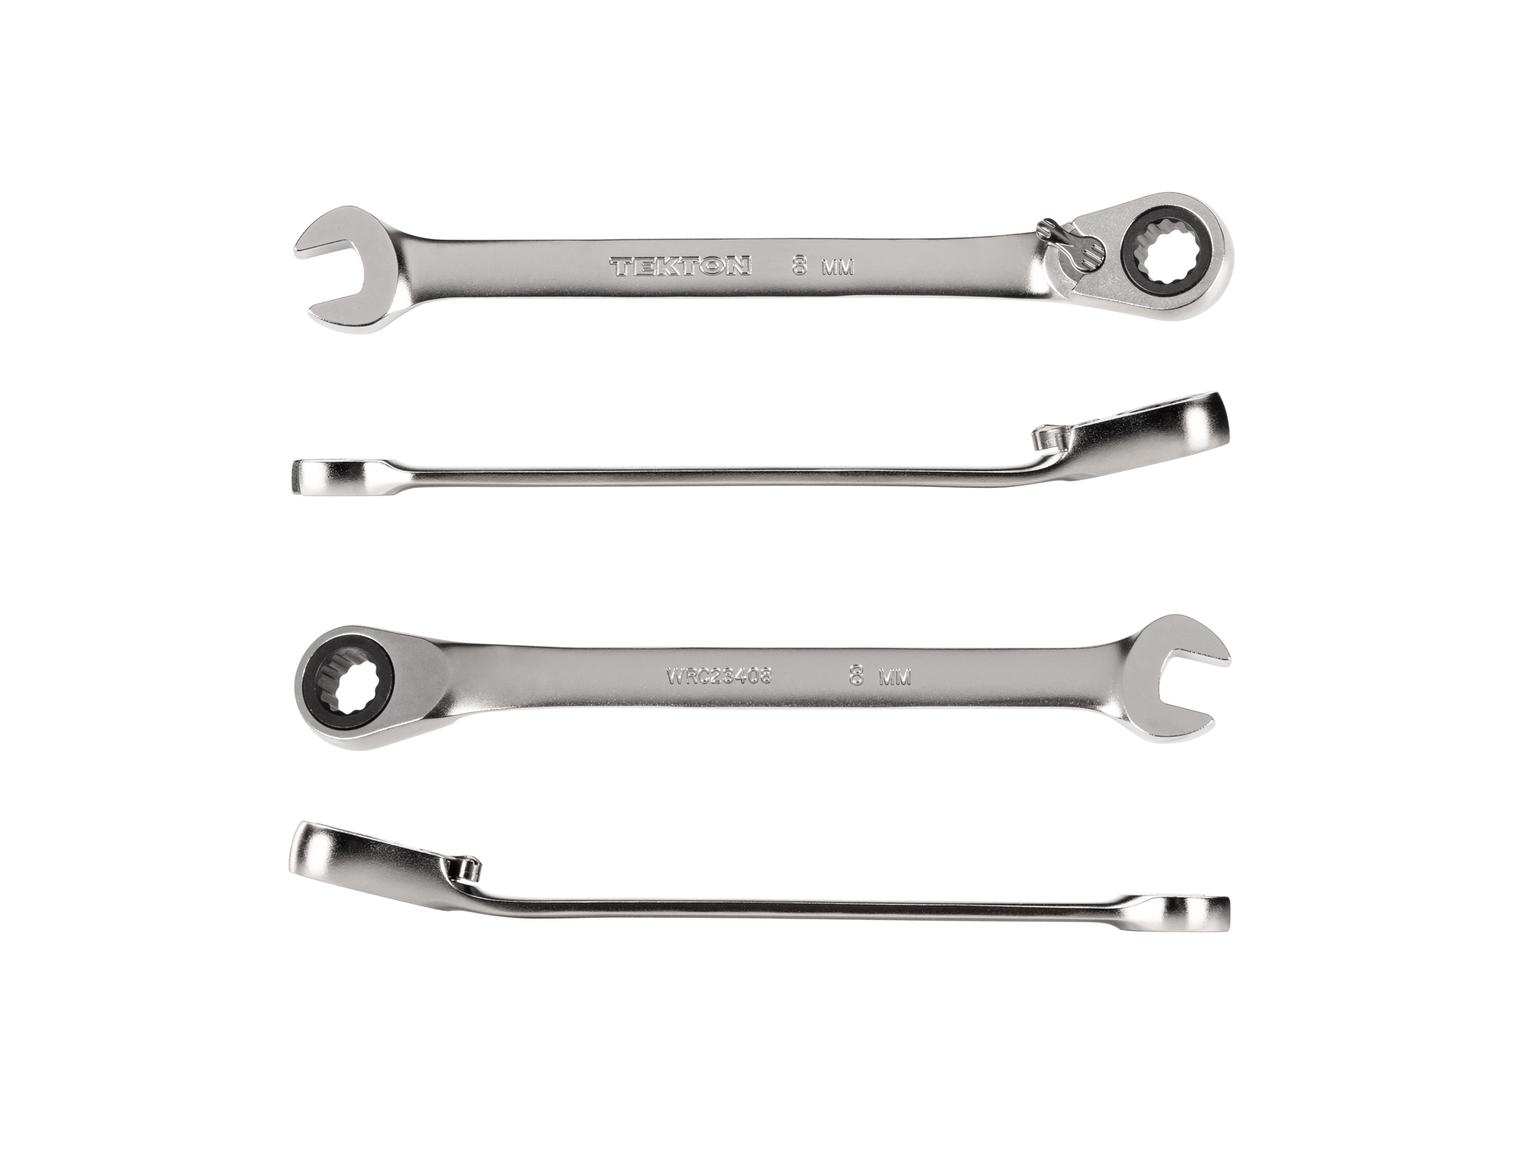 TEKTON WRC23408-T 8 mm Reversible 12-Point Ratcheting Combination Wrench